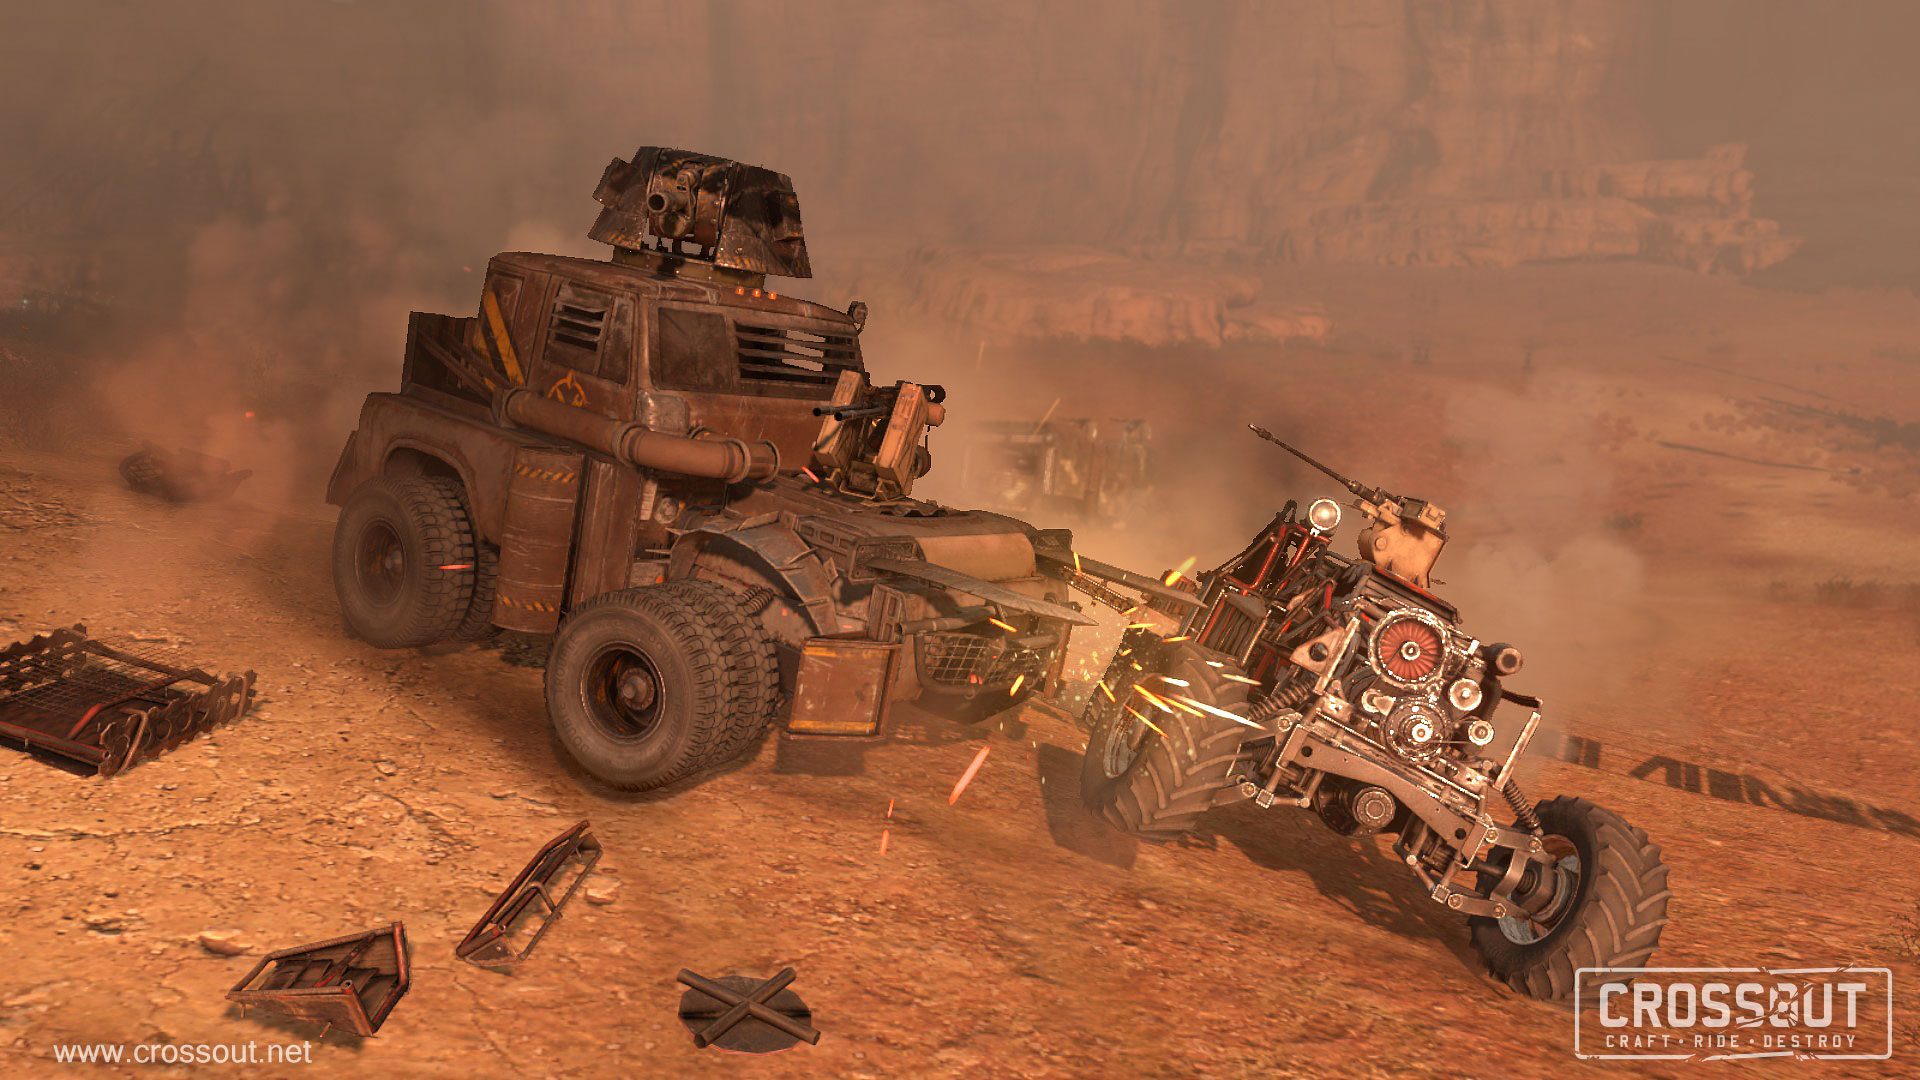 High-octane MMO ‘Crossout’ Revs Its Engines As It Races Toward its May 30th Launch